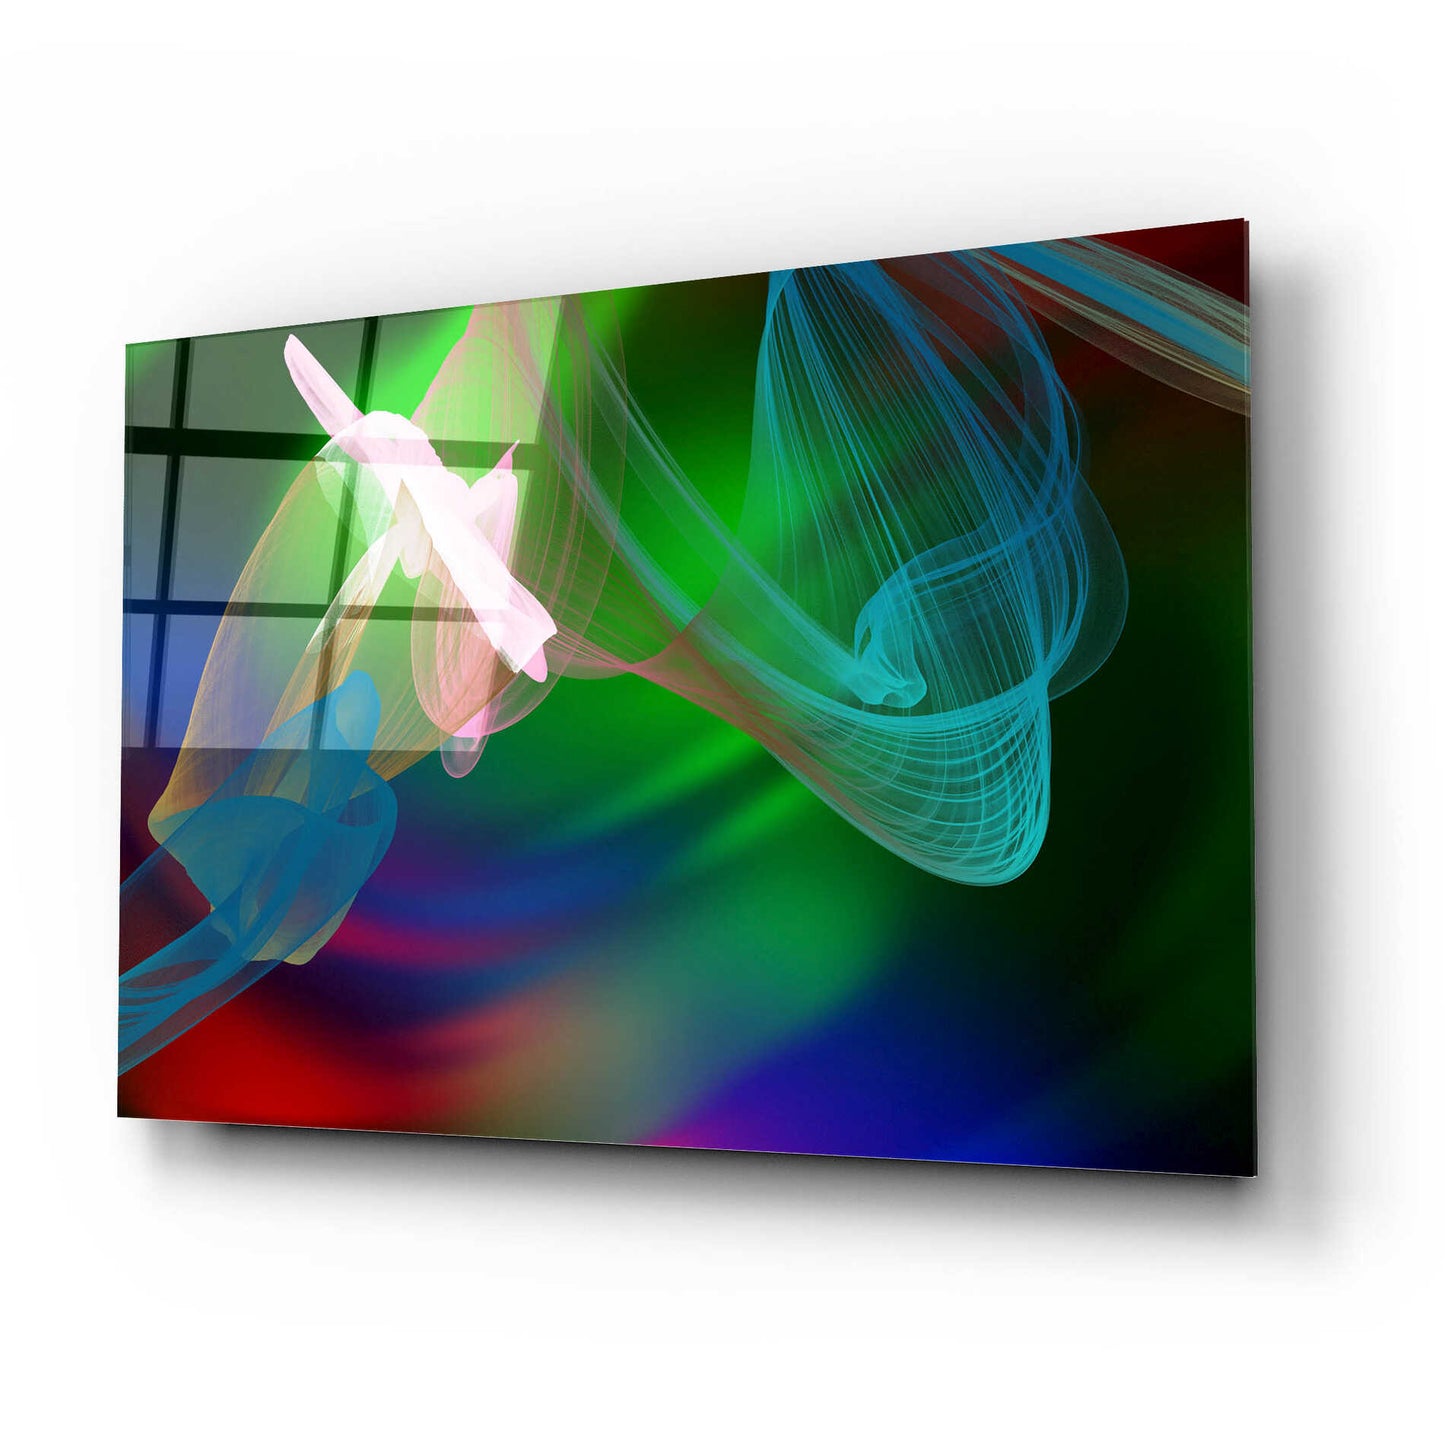 Epic Art 'Inverted Color In The Lines 2' by Irena Orlov Acrylic Glass Wall Art,24x16